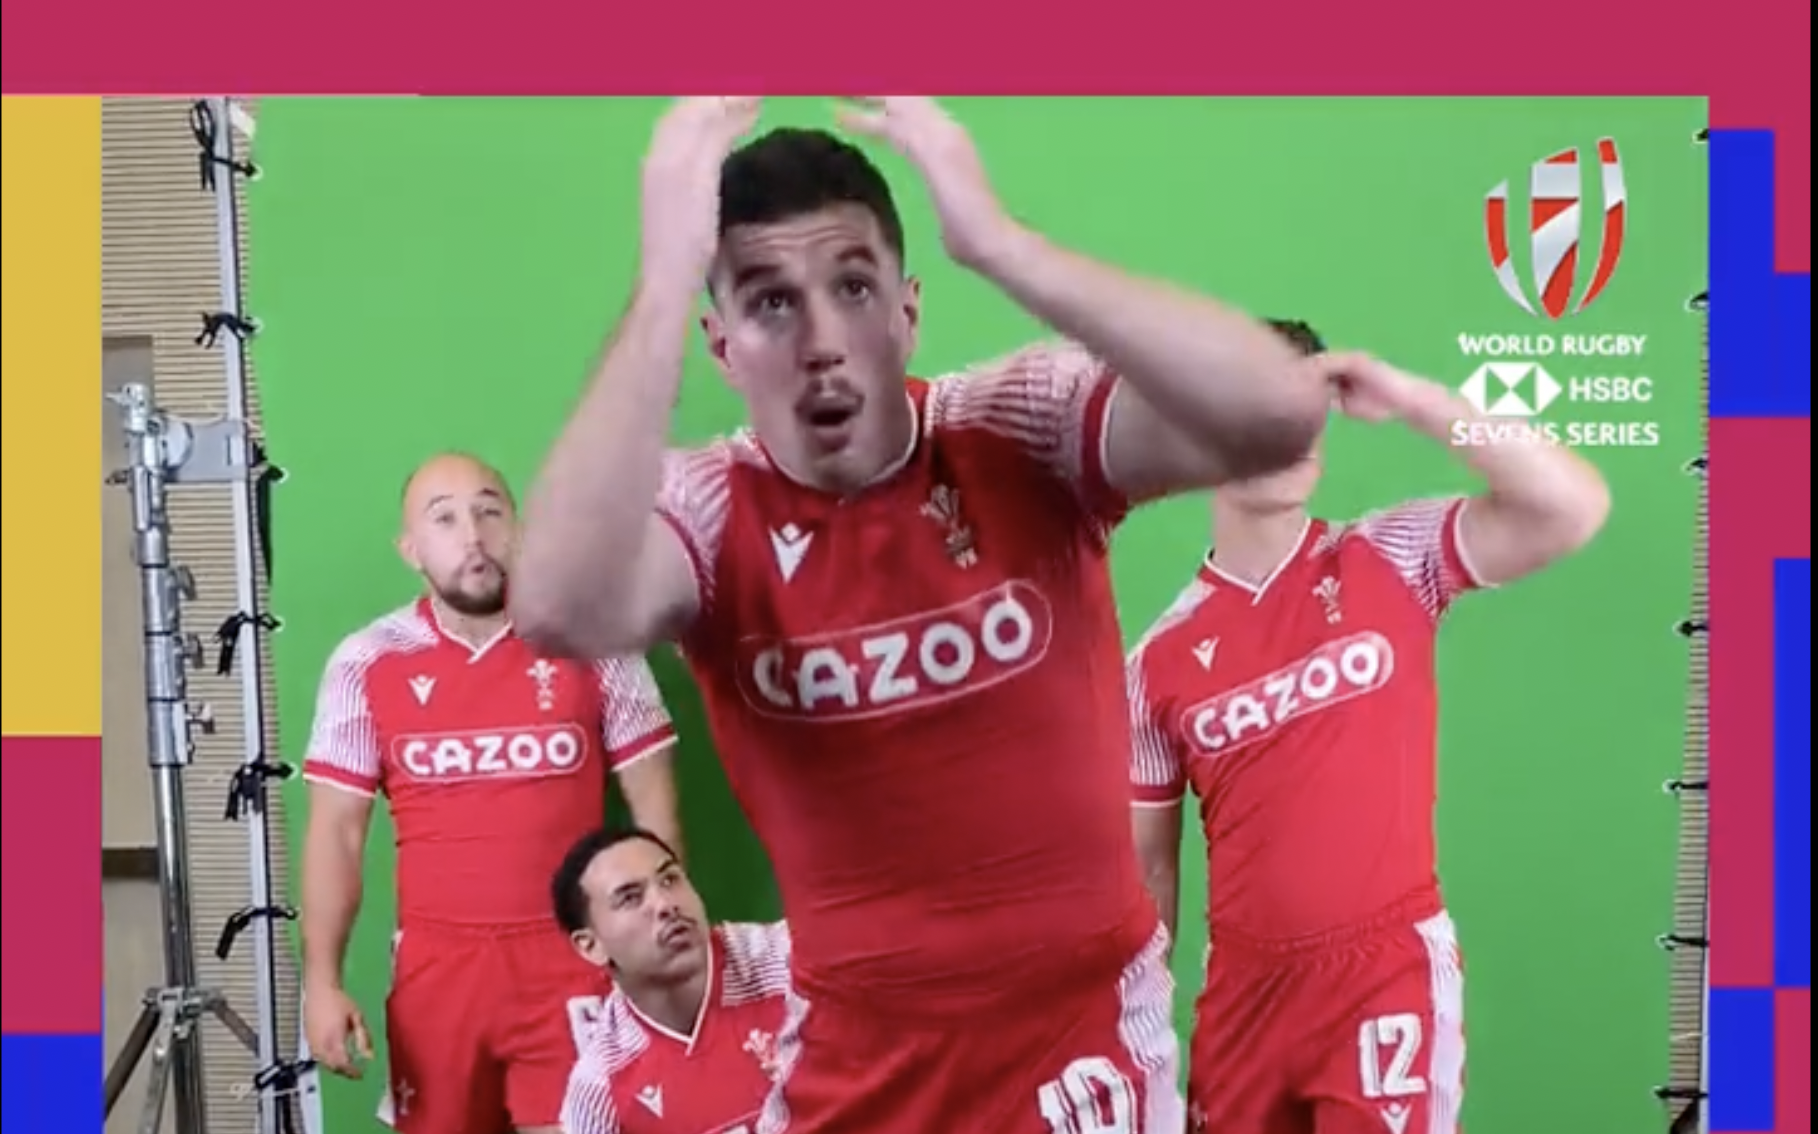 When promotional videos go wrong